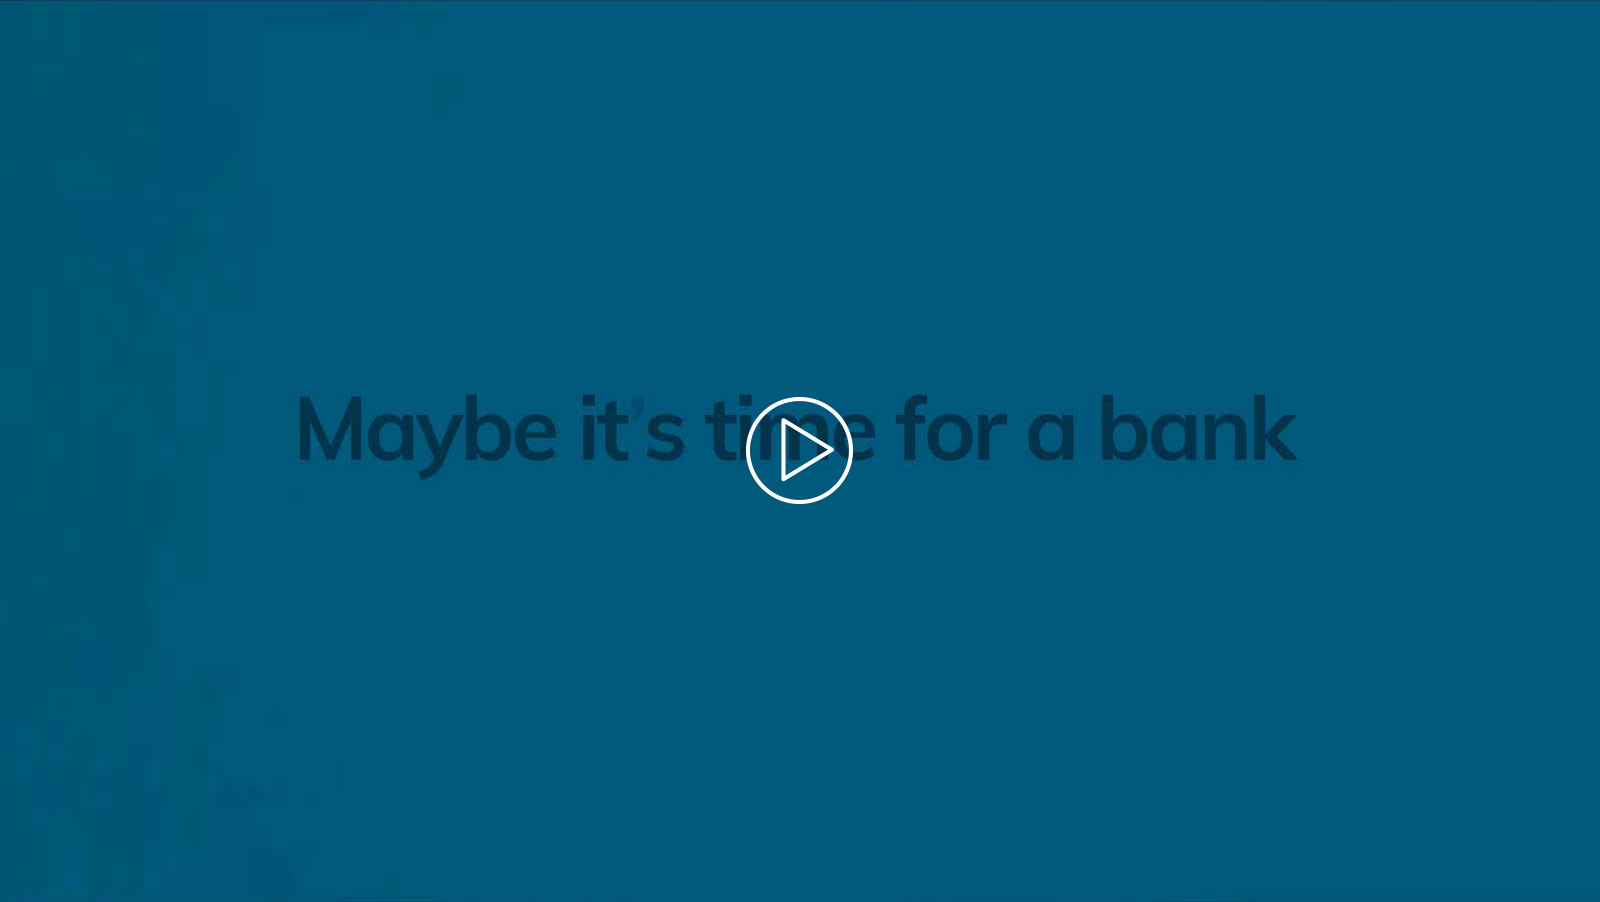 Bank of Burlington - Maybe its time video